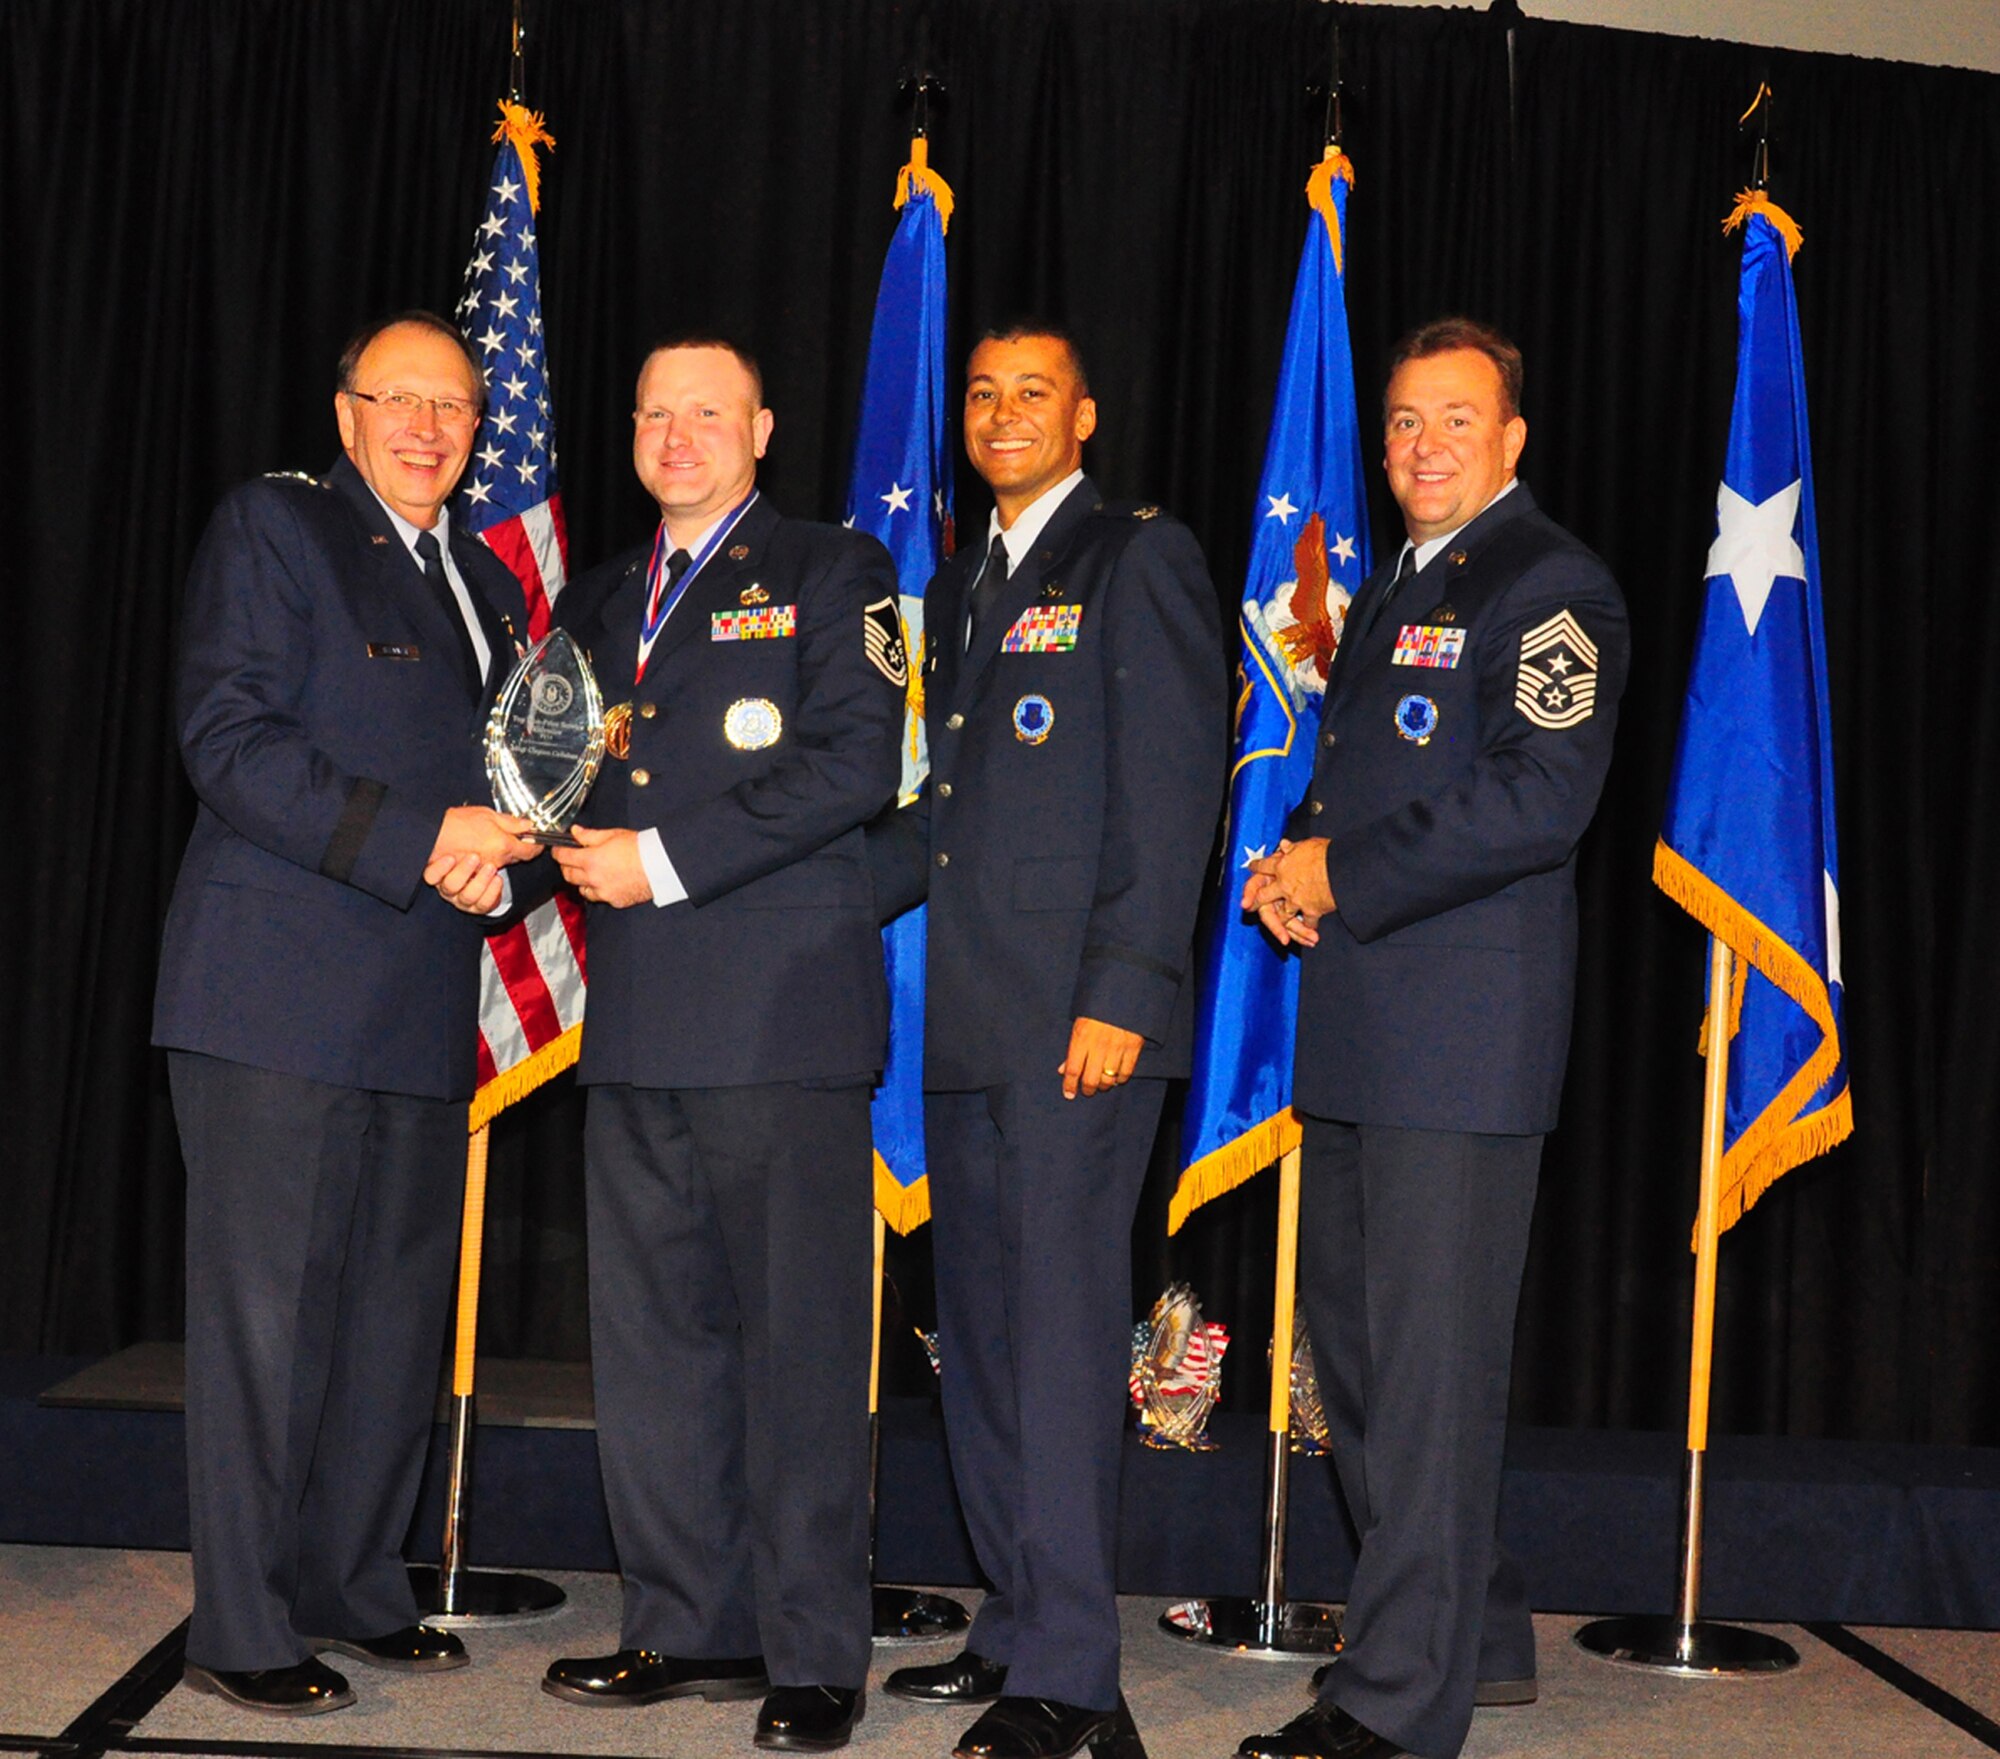 WRIGHT-PATTERSON AIR FORCE BASE, Ohio - Master Sgt. Clayton Callahan was recognized as the 2011 Gold Medalist-Top Non Prior Service Recruiter of the year Oct. 27. Lt. Gen. Charles Stenner, Jr., commander of Air Force Reserve Command and chief of the Air Force Reserve, congratulates him as Col. Joe Wilburn, AFRC Recruiting Service commander and director of recruiting and Chief Master Sgt. Robert Starkey, AFRC Recruiting Service command chief, look on. (Courtesy photo)